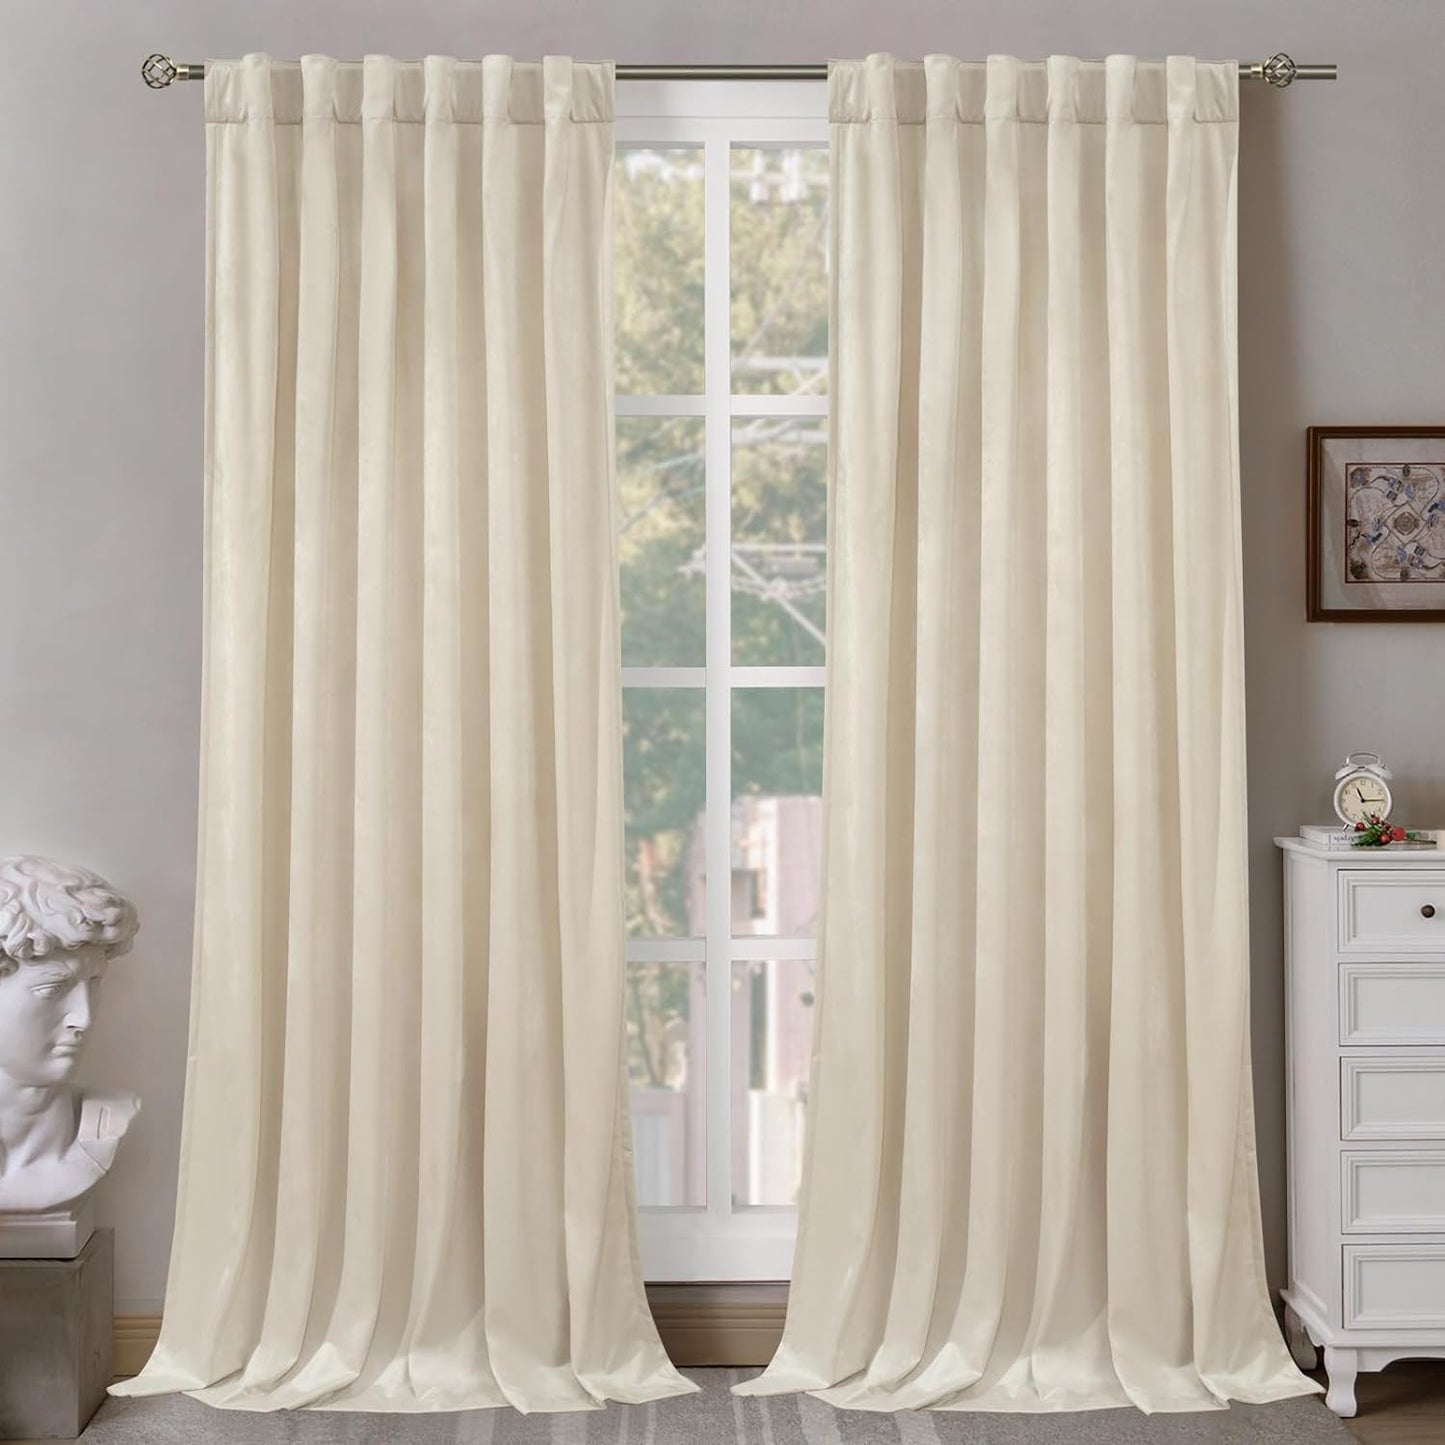 Bgment Grey Velvet Curtains 108 Inches Long for Living Room, Thermal Insulated Room Darkening Curtains Drapes Window Treatment with Back Tab and Rod Pocket, Set of 2 Panels, 52 X 108 Inch  BGment Cream Beige 52W X 90L 